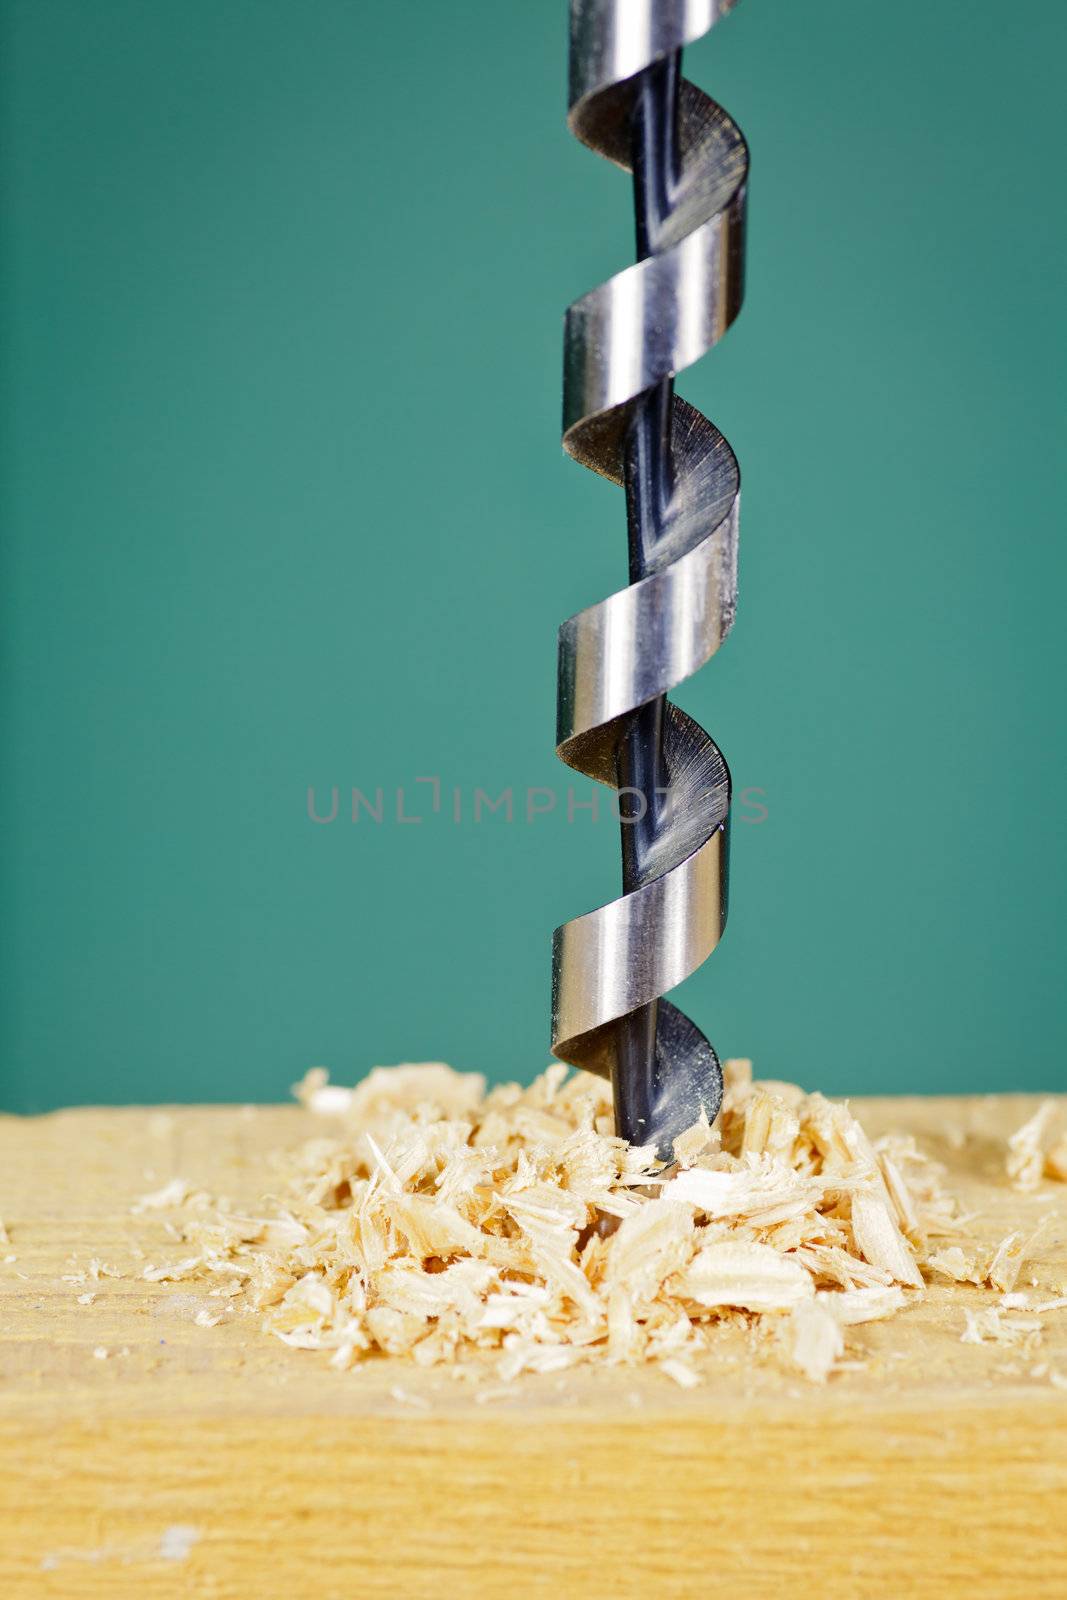 Drilling in wood by naumoid